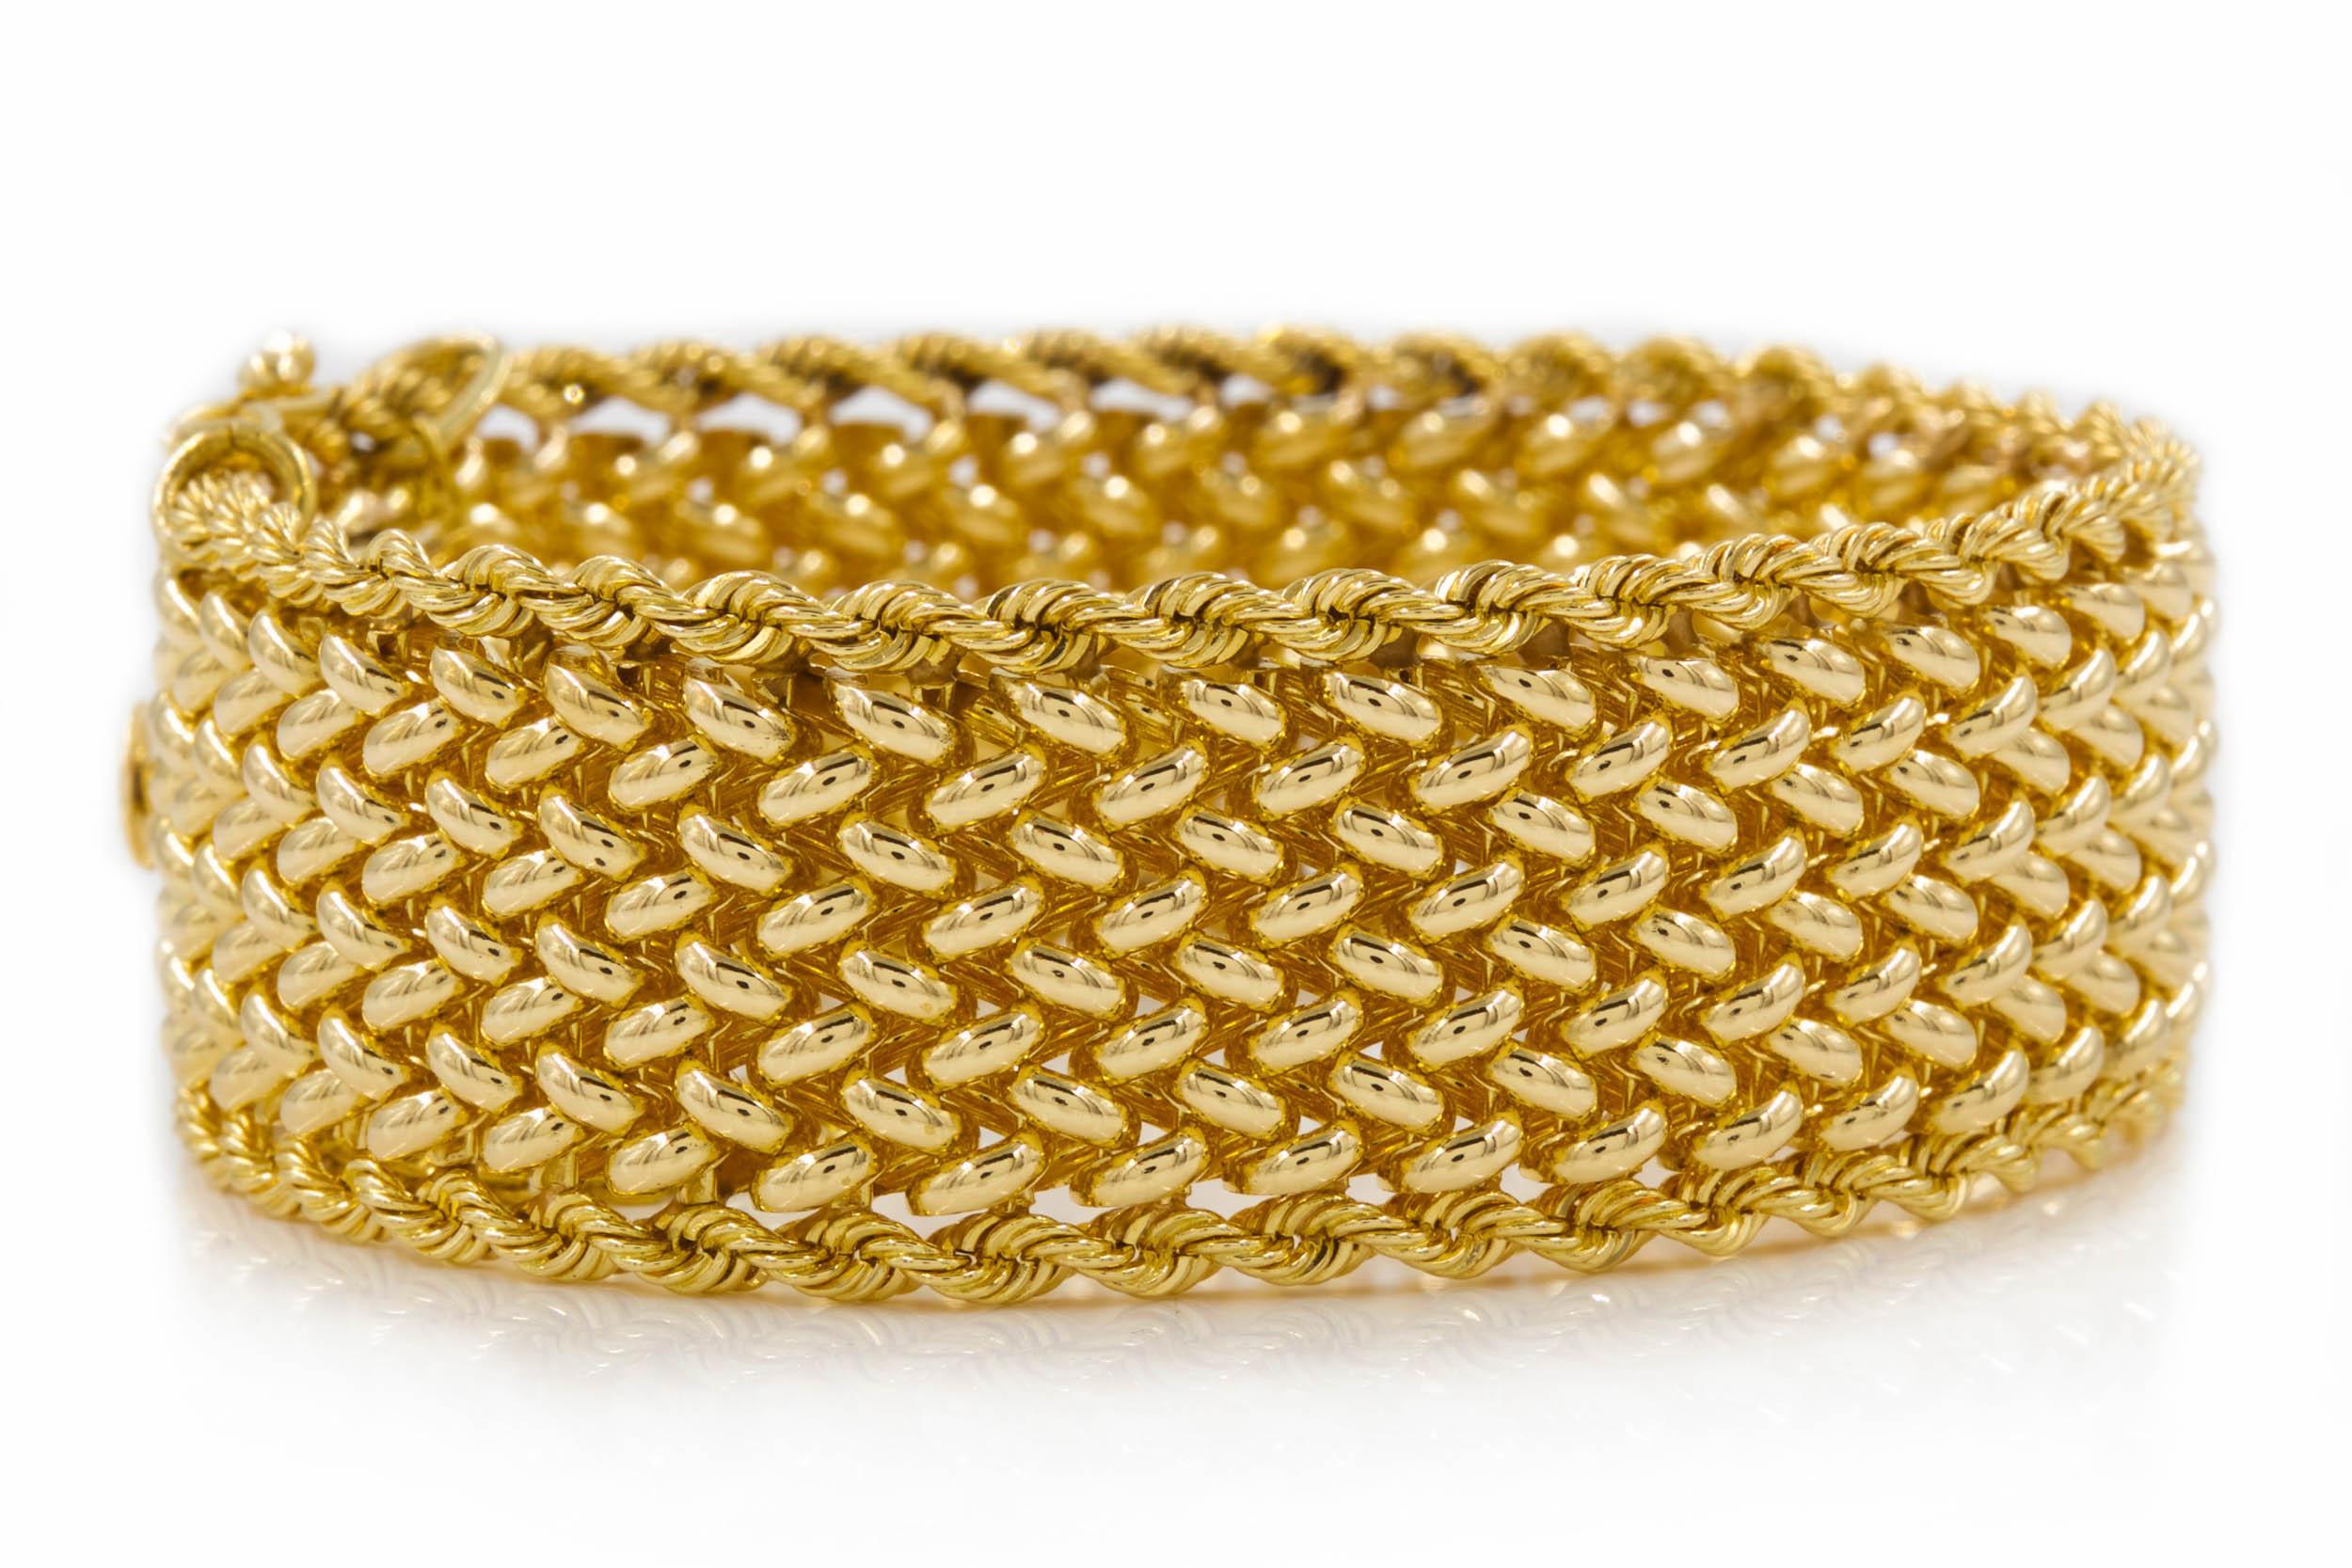 20th Century Estate 14K Yellow Gold Woven Mesh Bracelet by Carl Lindstrom